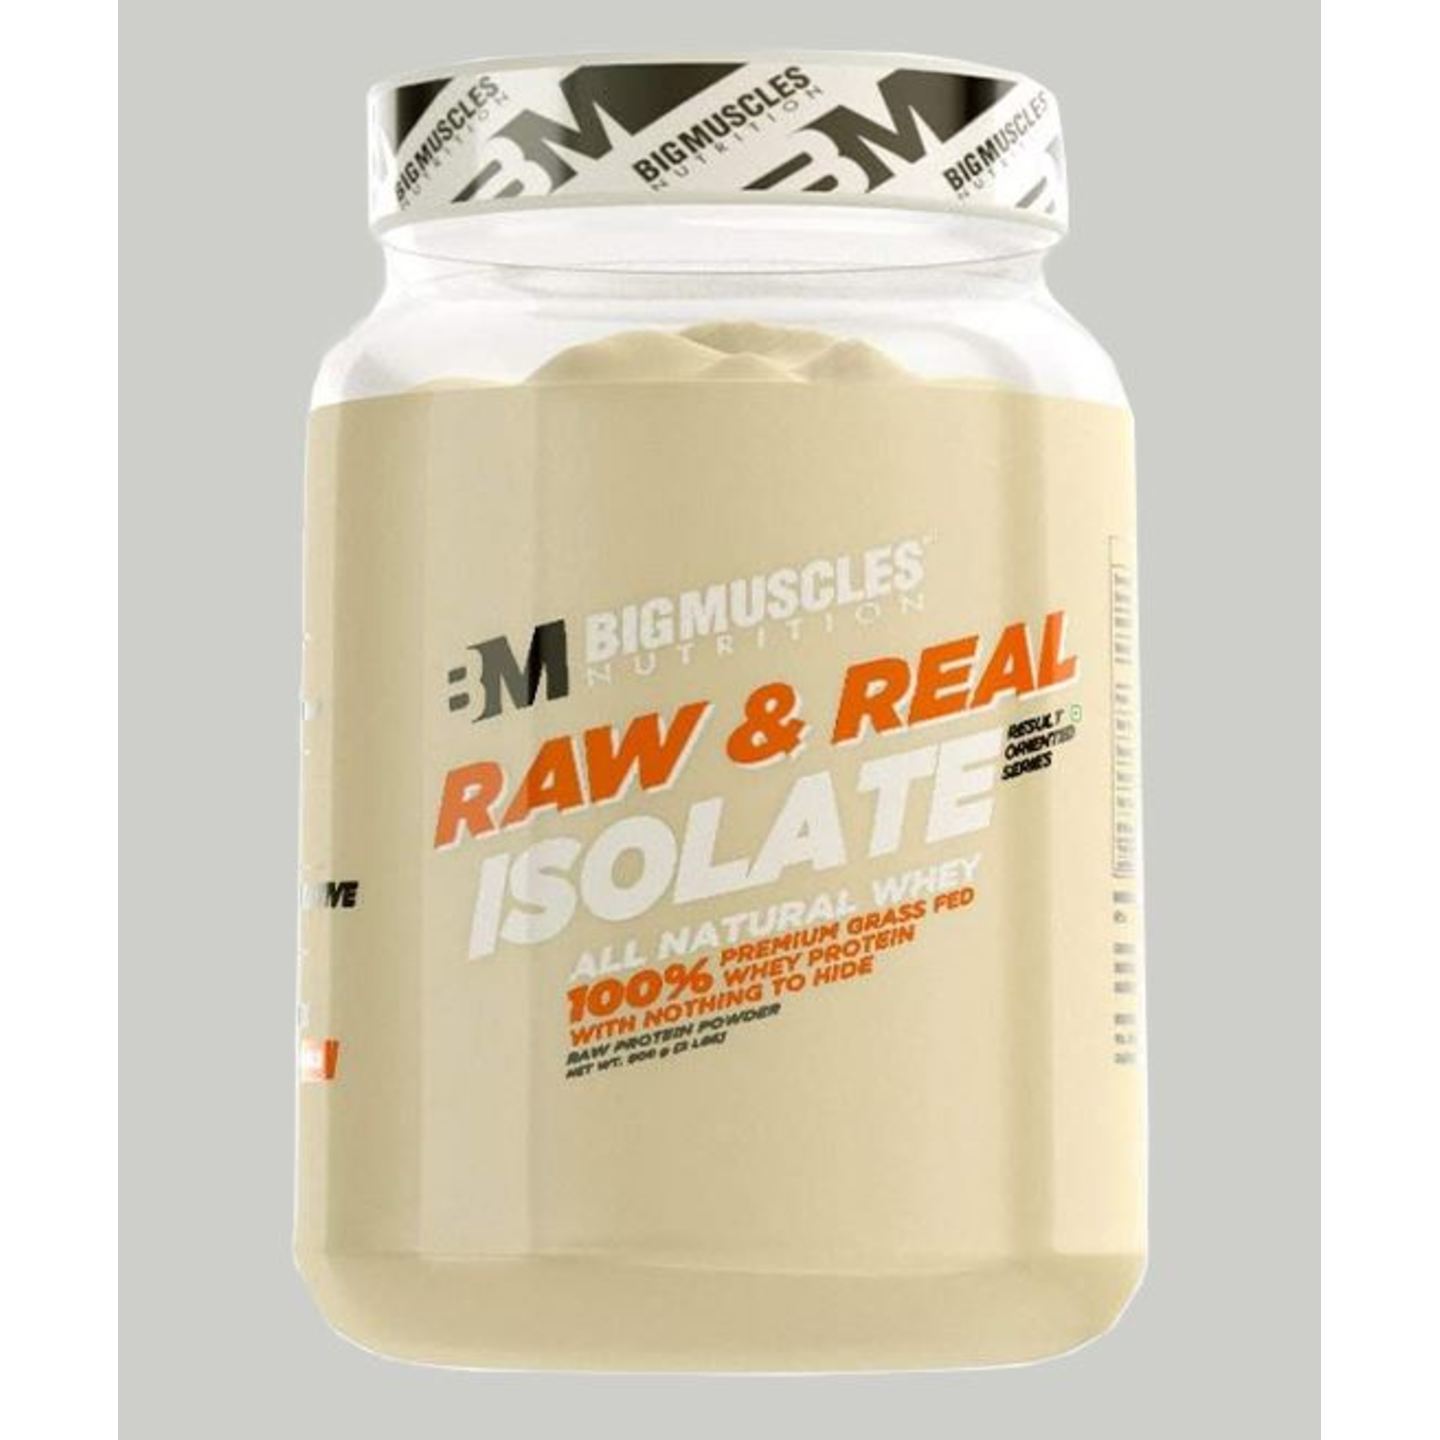 MastMart Bigmuscles Nutrition Raw & Real Isolate Whey Protein Unflavoured 2lbs